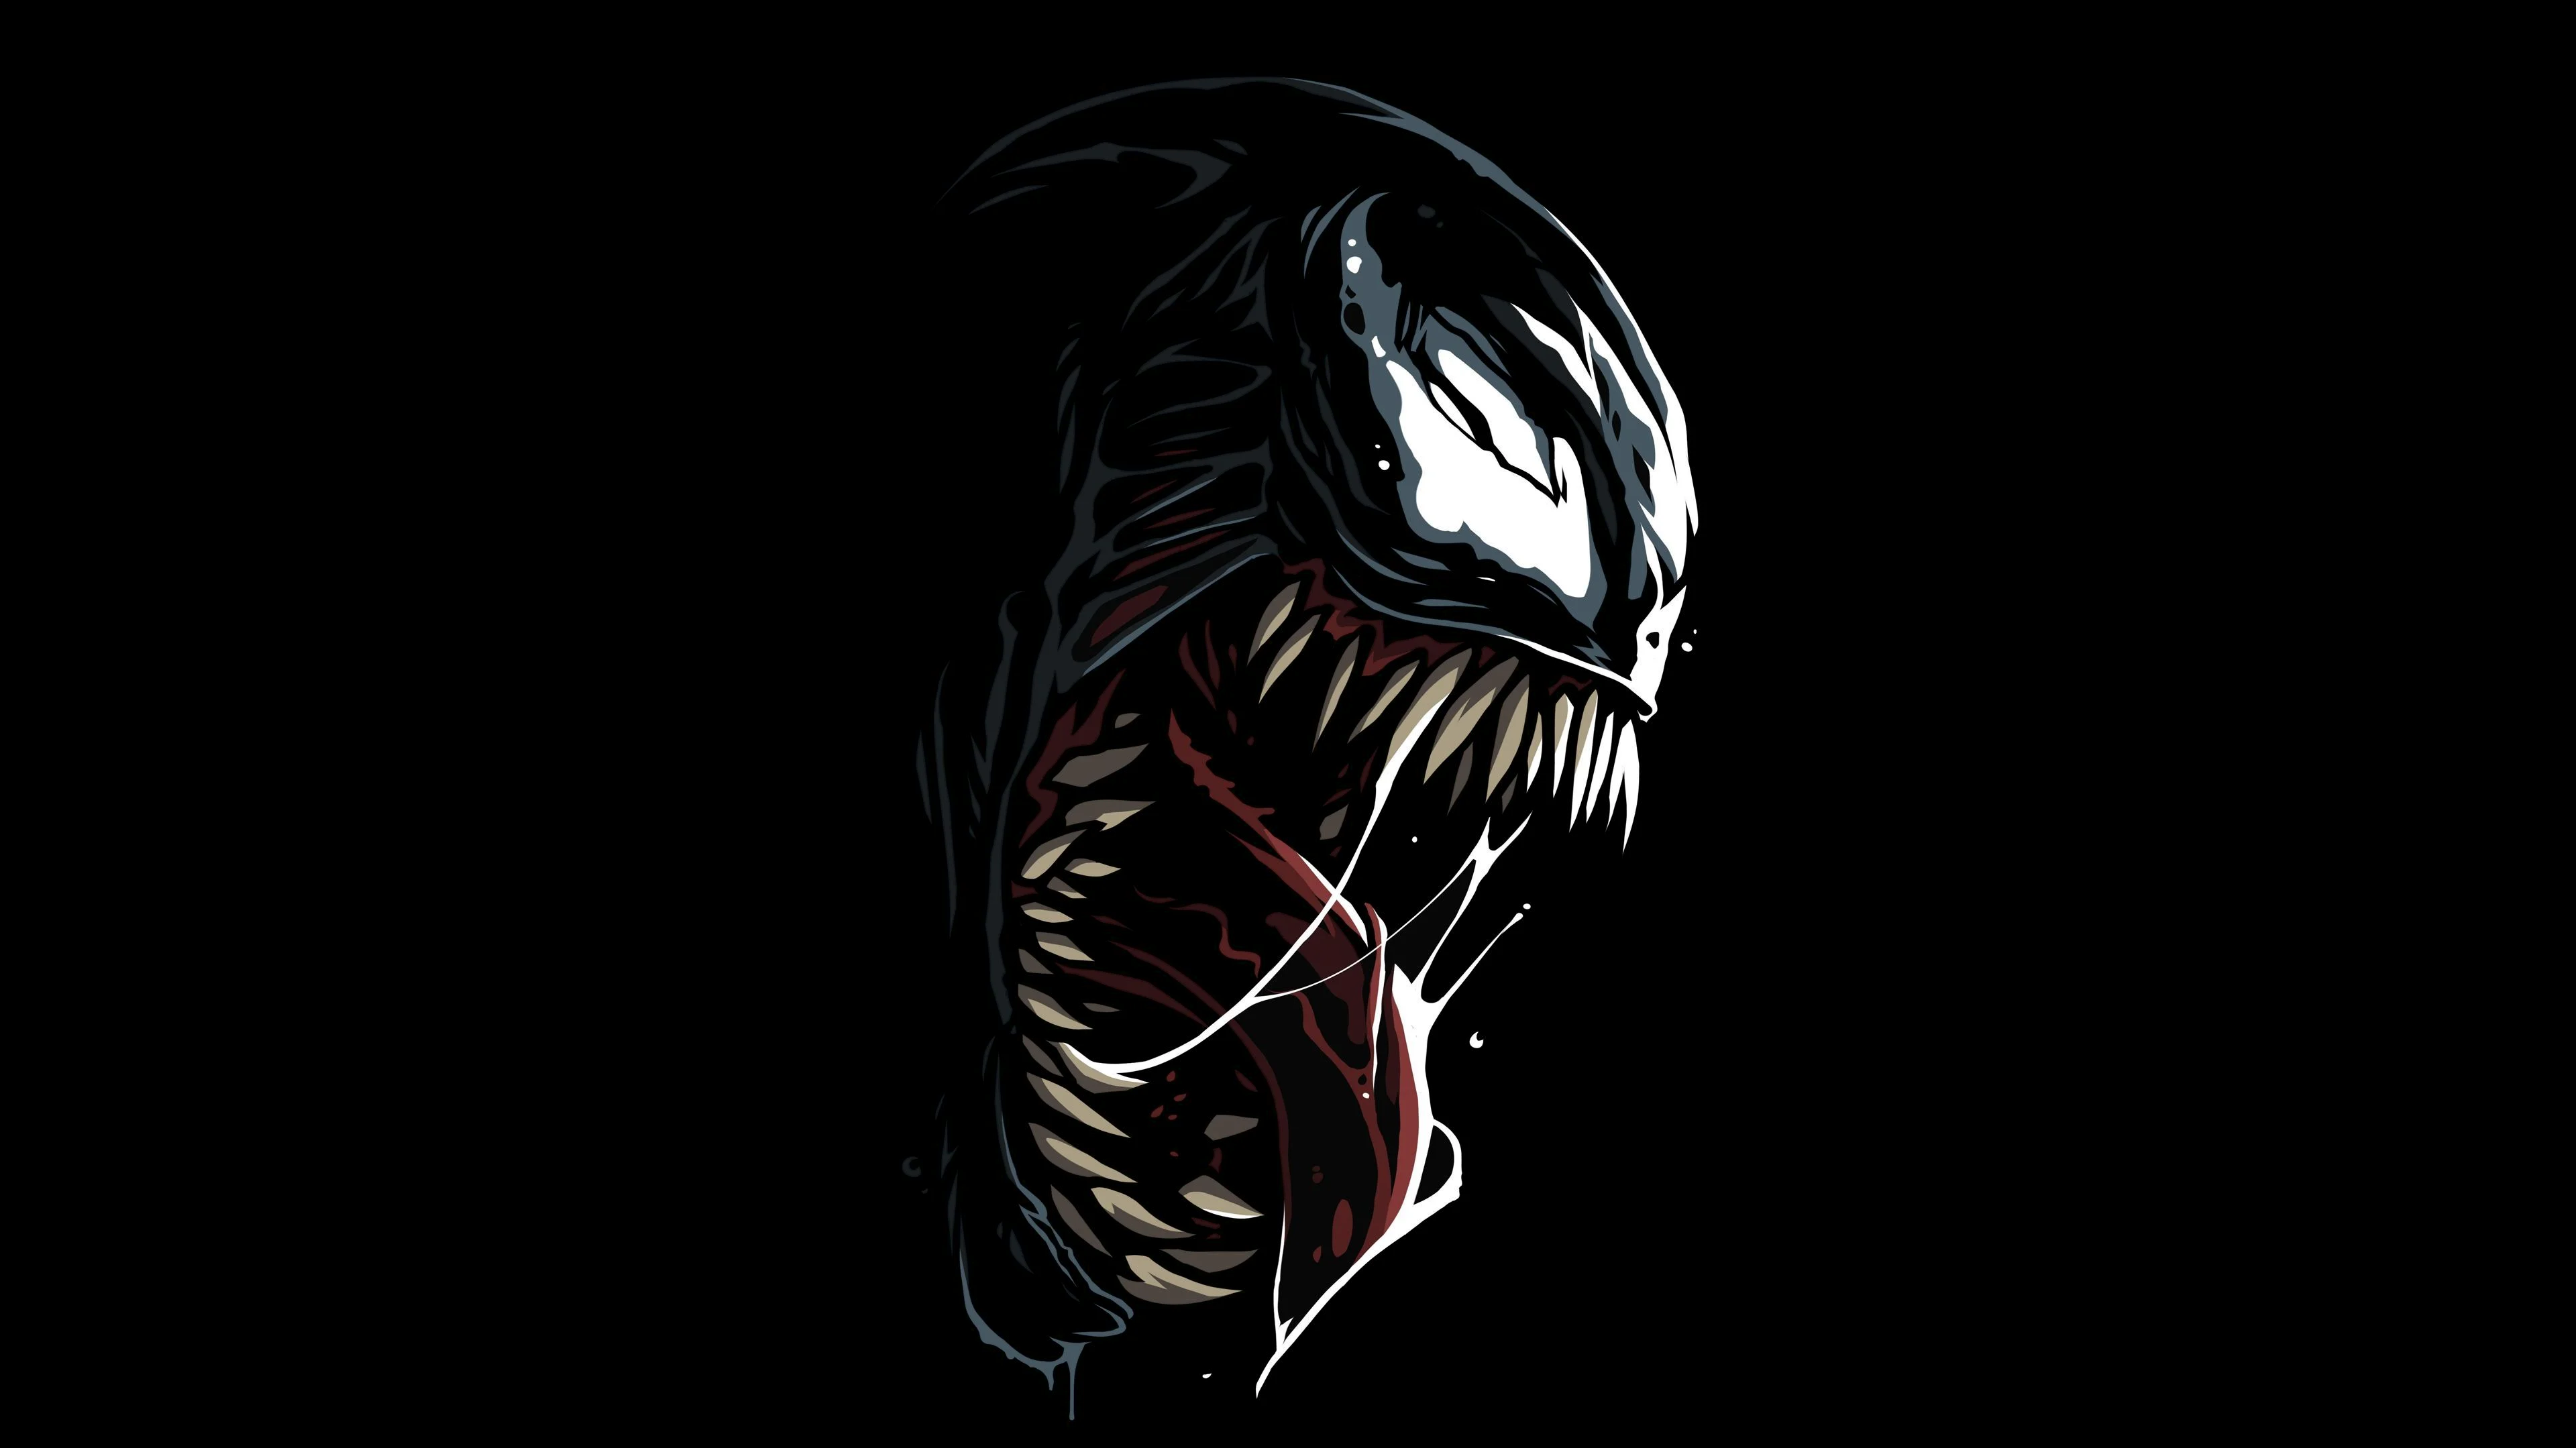 Venom 4K wallpapers for your desktop or mobile screen free and